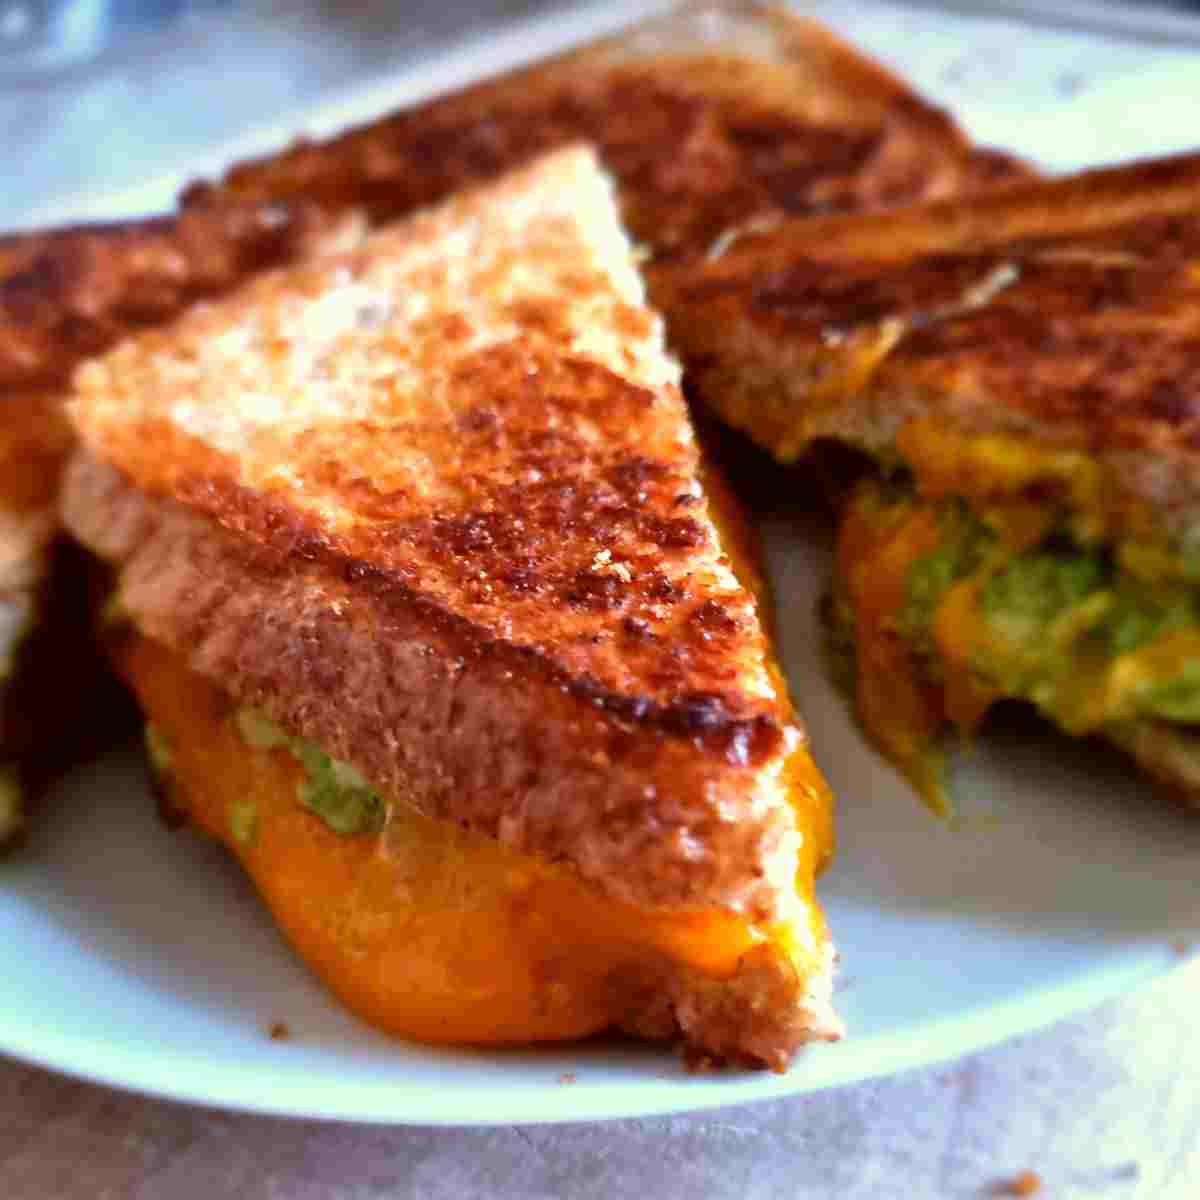 Avocado grilled cheese sandwiches cut into triangles on a white plate.